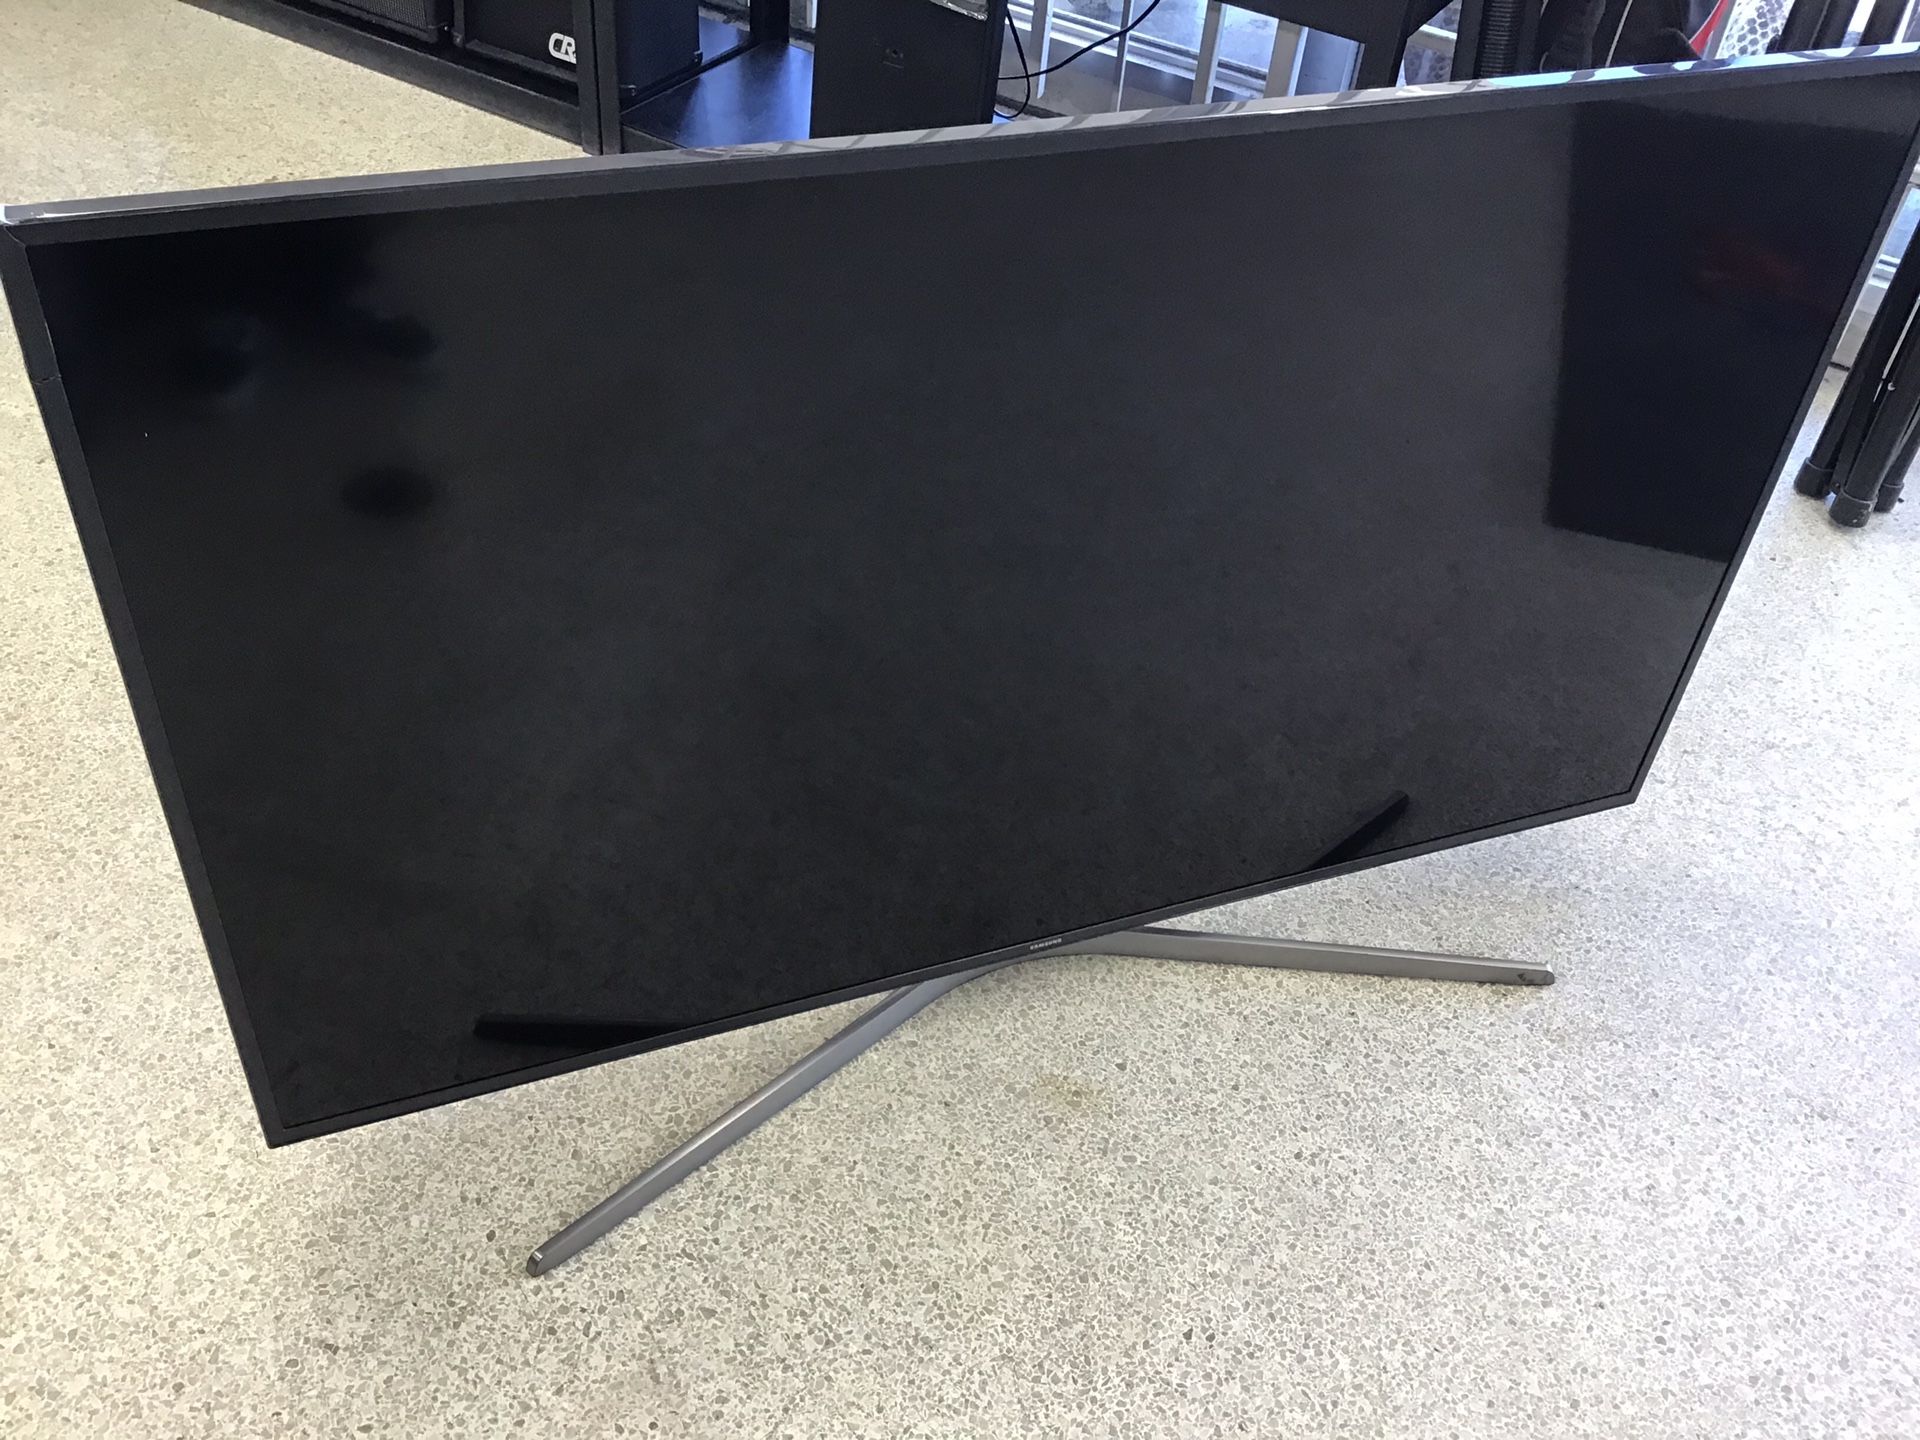 Samsung 58” smart 4K tv with remote stand feet and power cord ...